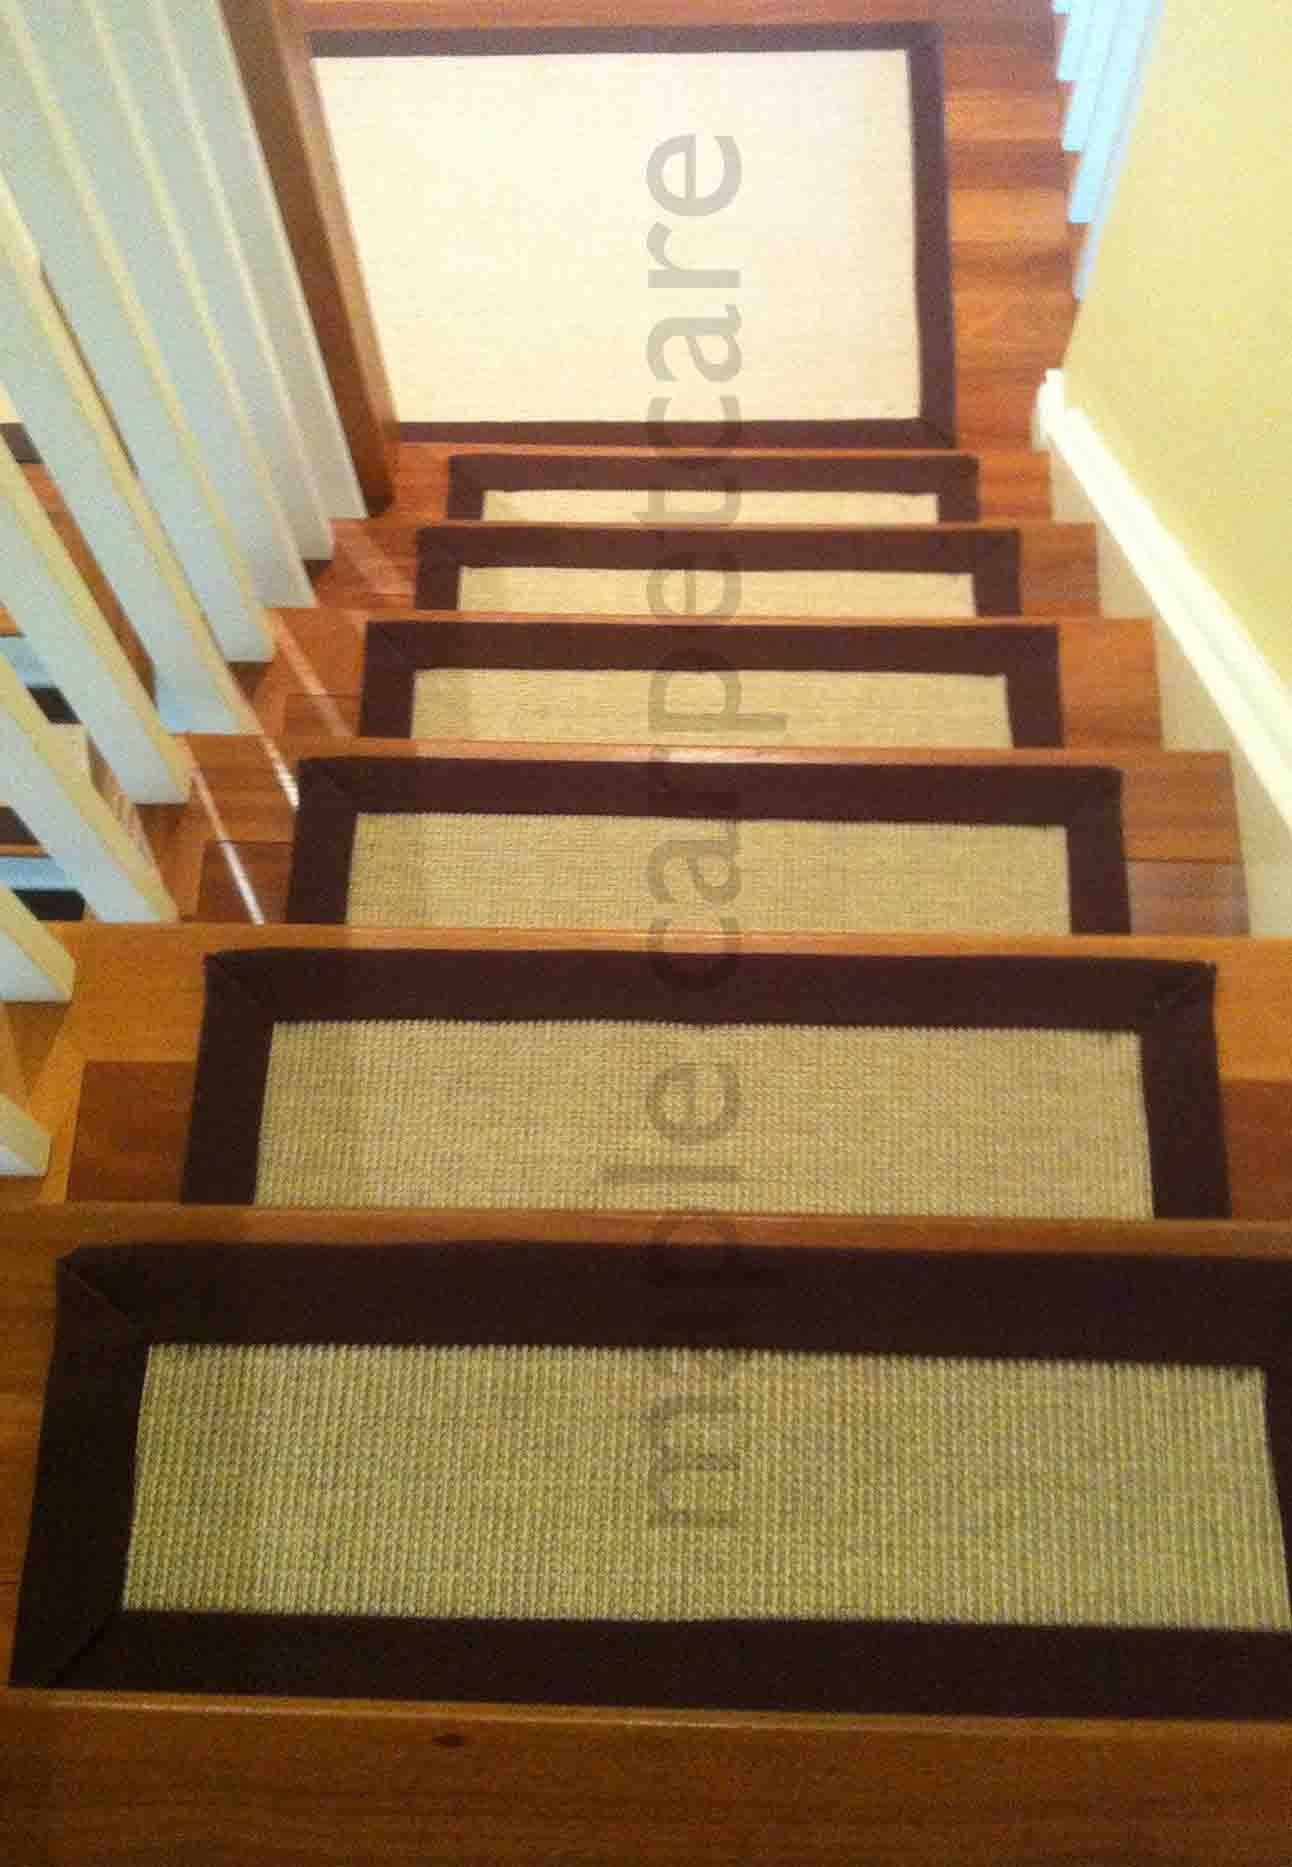 Stair Rugs Rugs For Runners On Stairs Sisal Carpet Laid As Runner With Stair Treads And Matching Rugs (View 2 of 15)